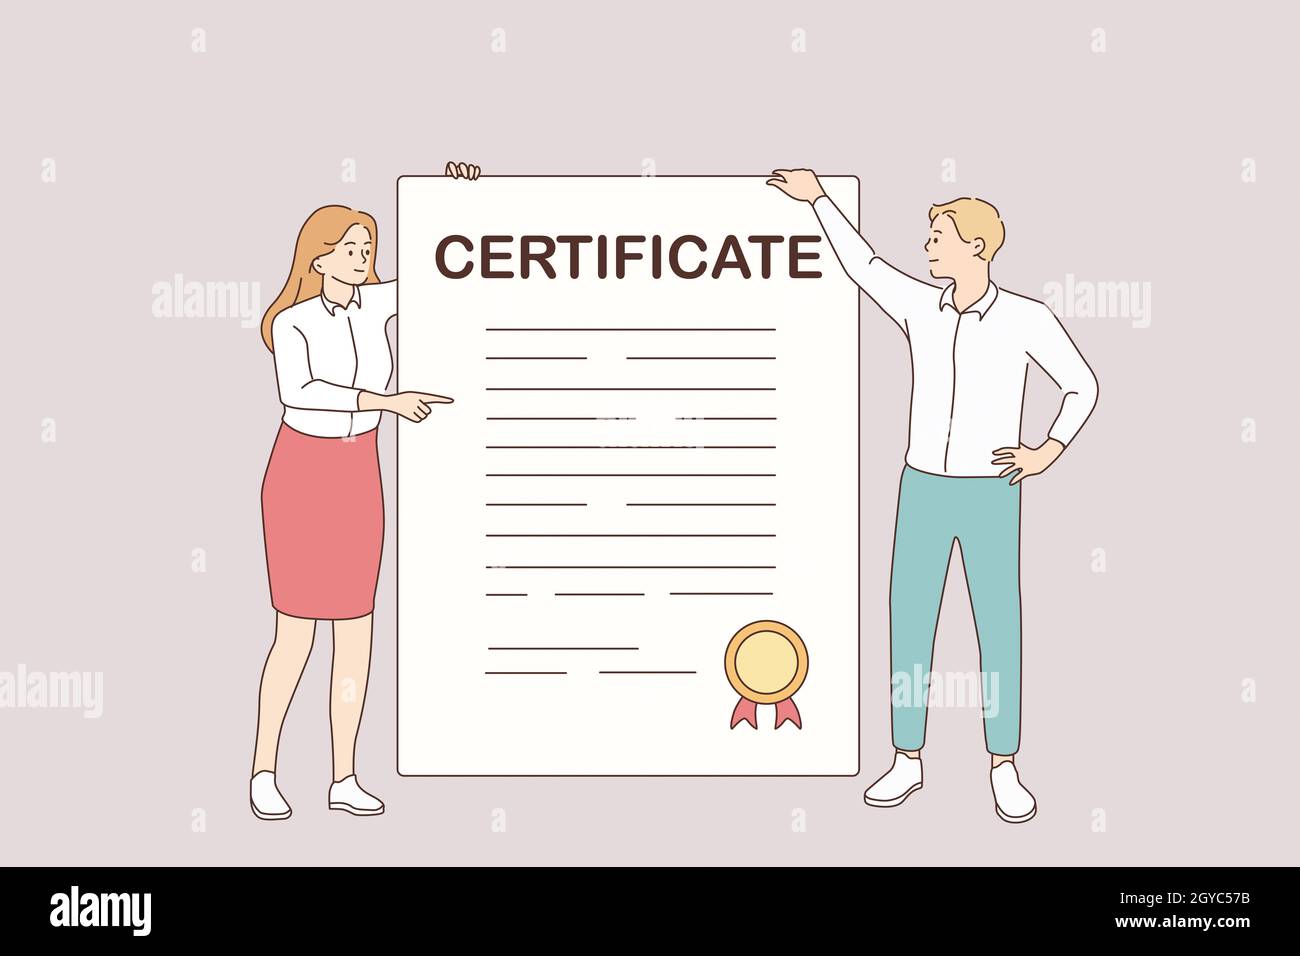 Business certificate and development concept. Young smiling partners woman and man cartoon characters standing holding huge certificate with official Stock Photo